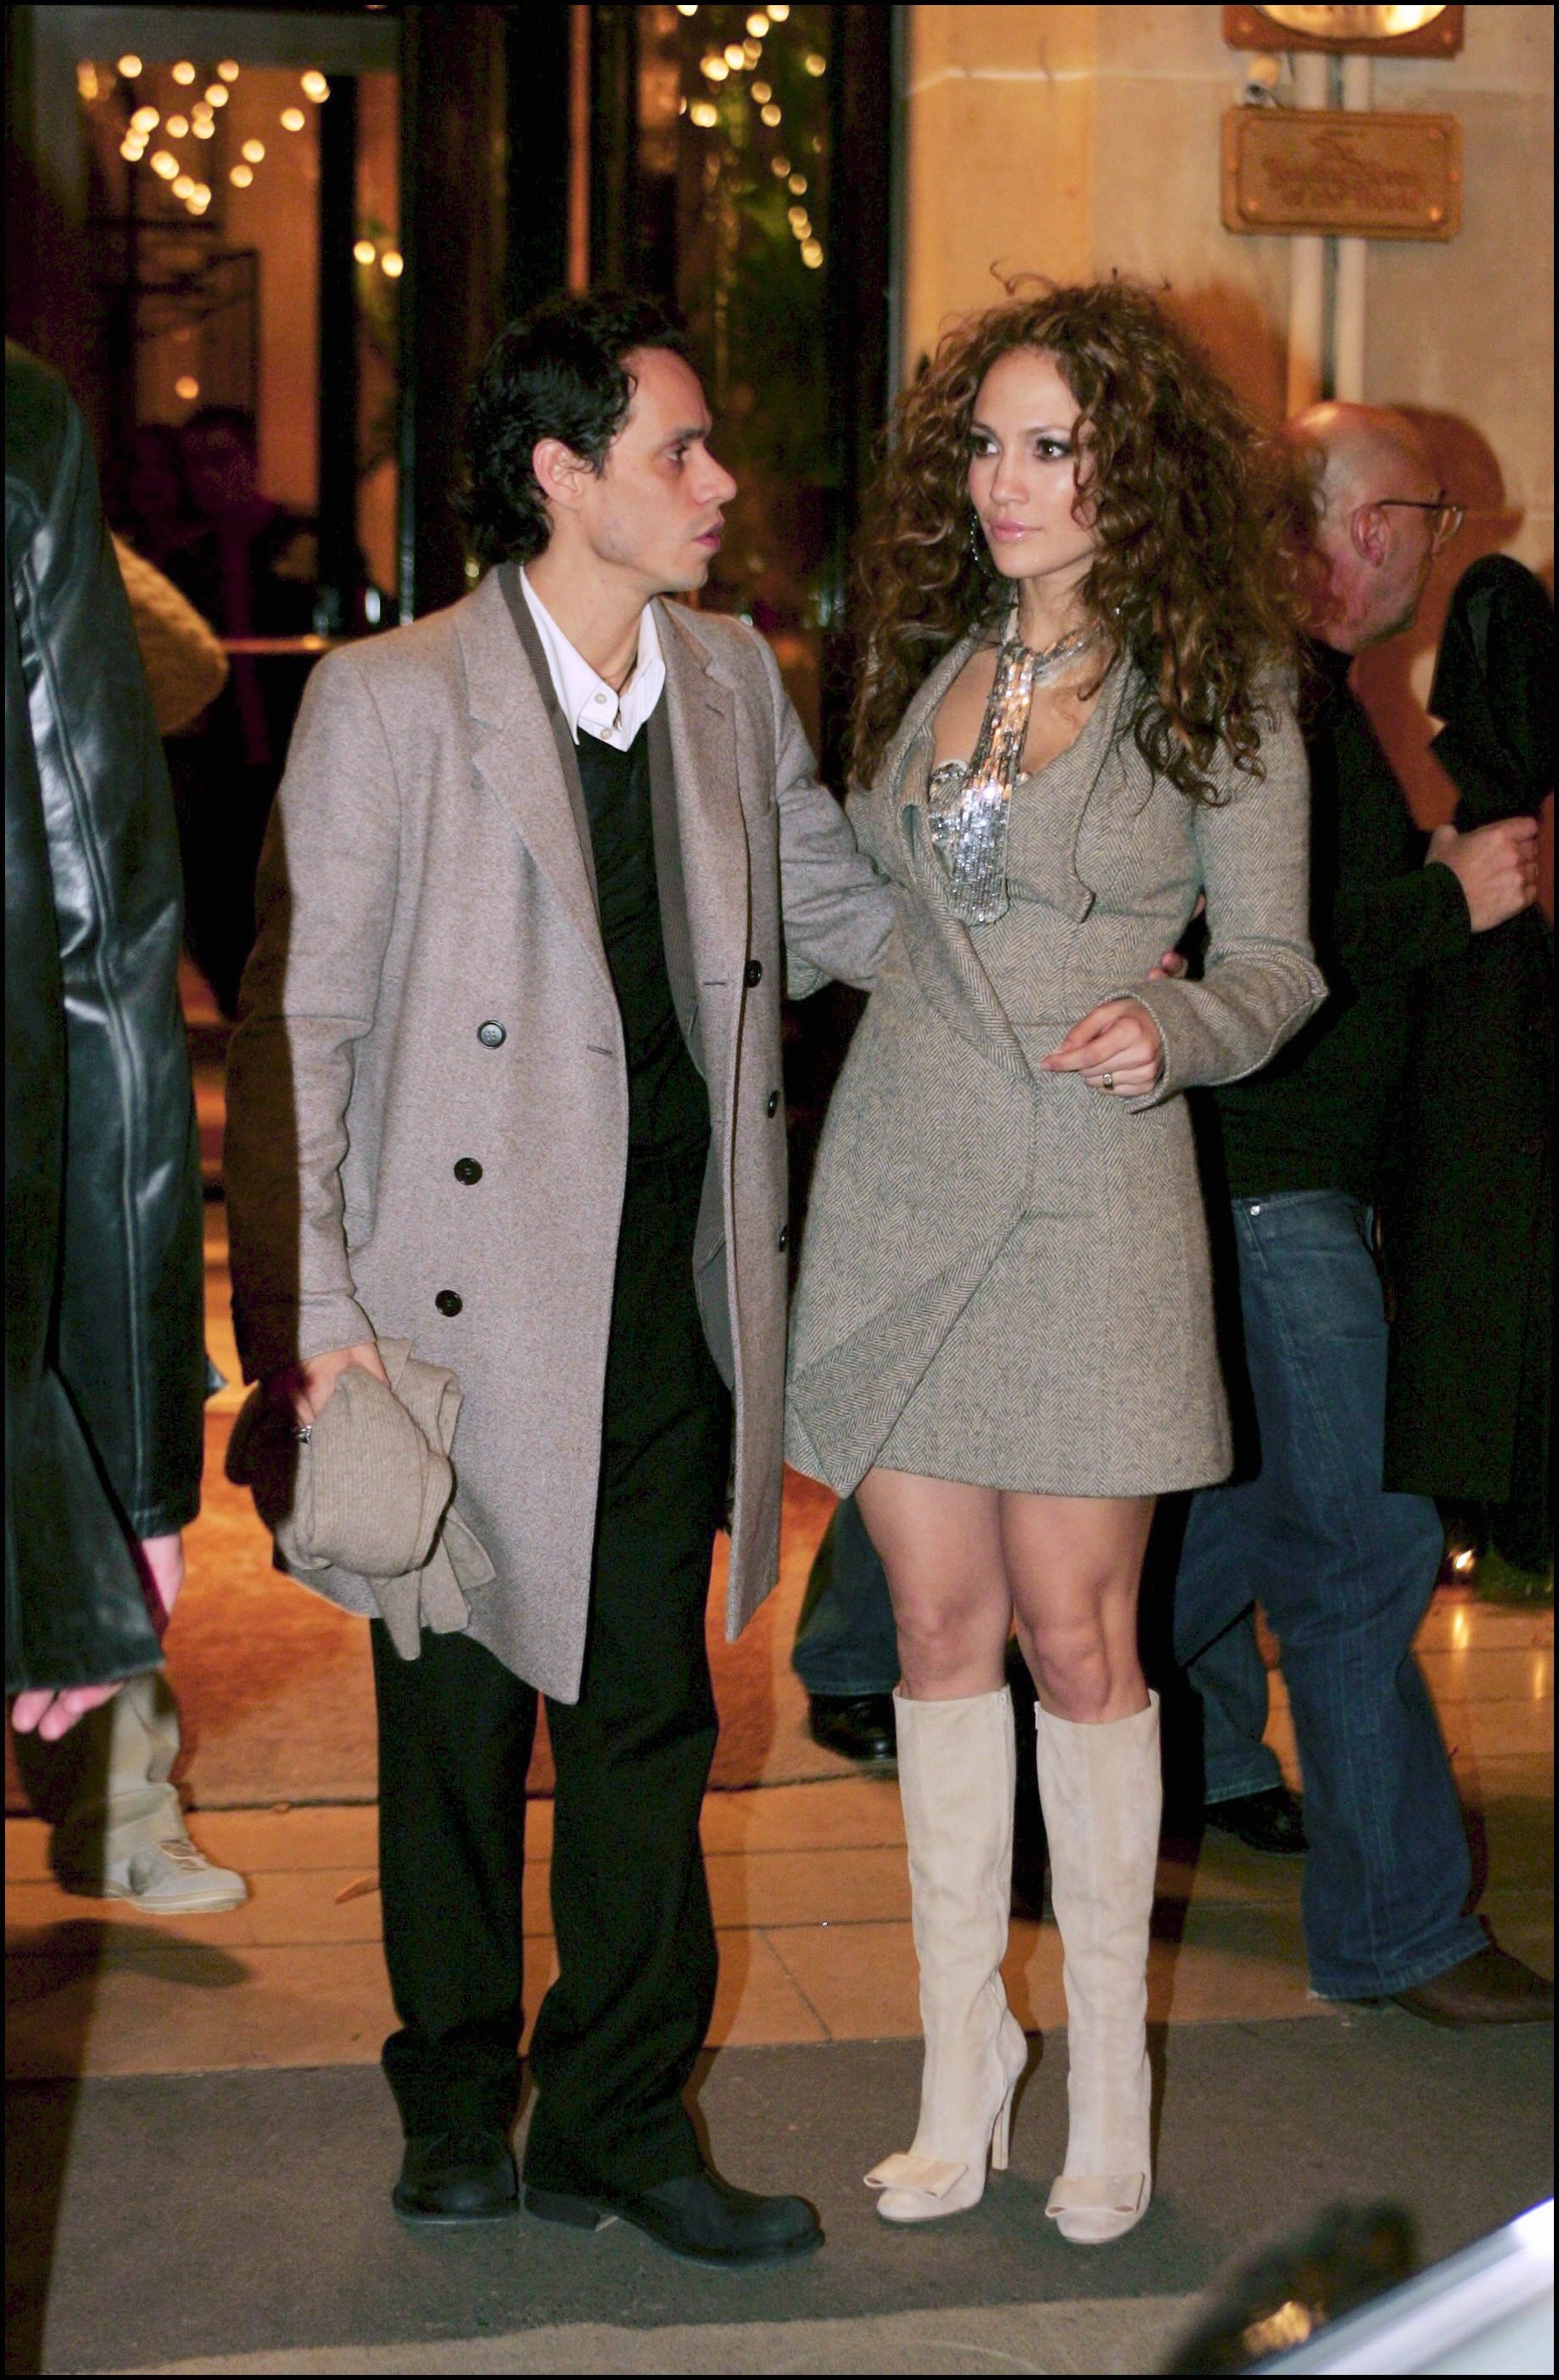 Singer Jennifer Lopez and songwriter Marc Anthony pictured in Paris on December 8, 2004. | Source: Getty Images